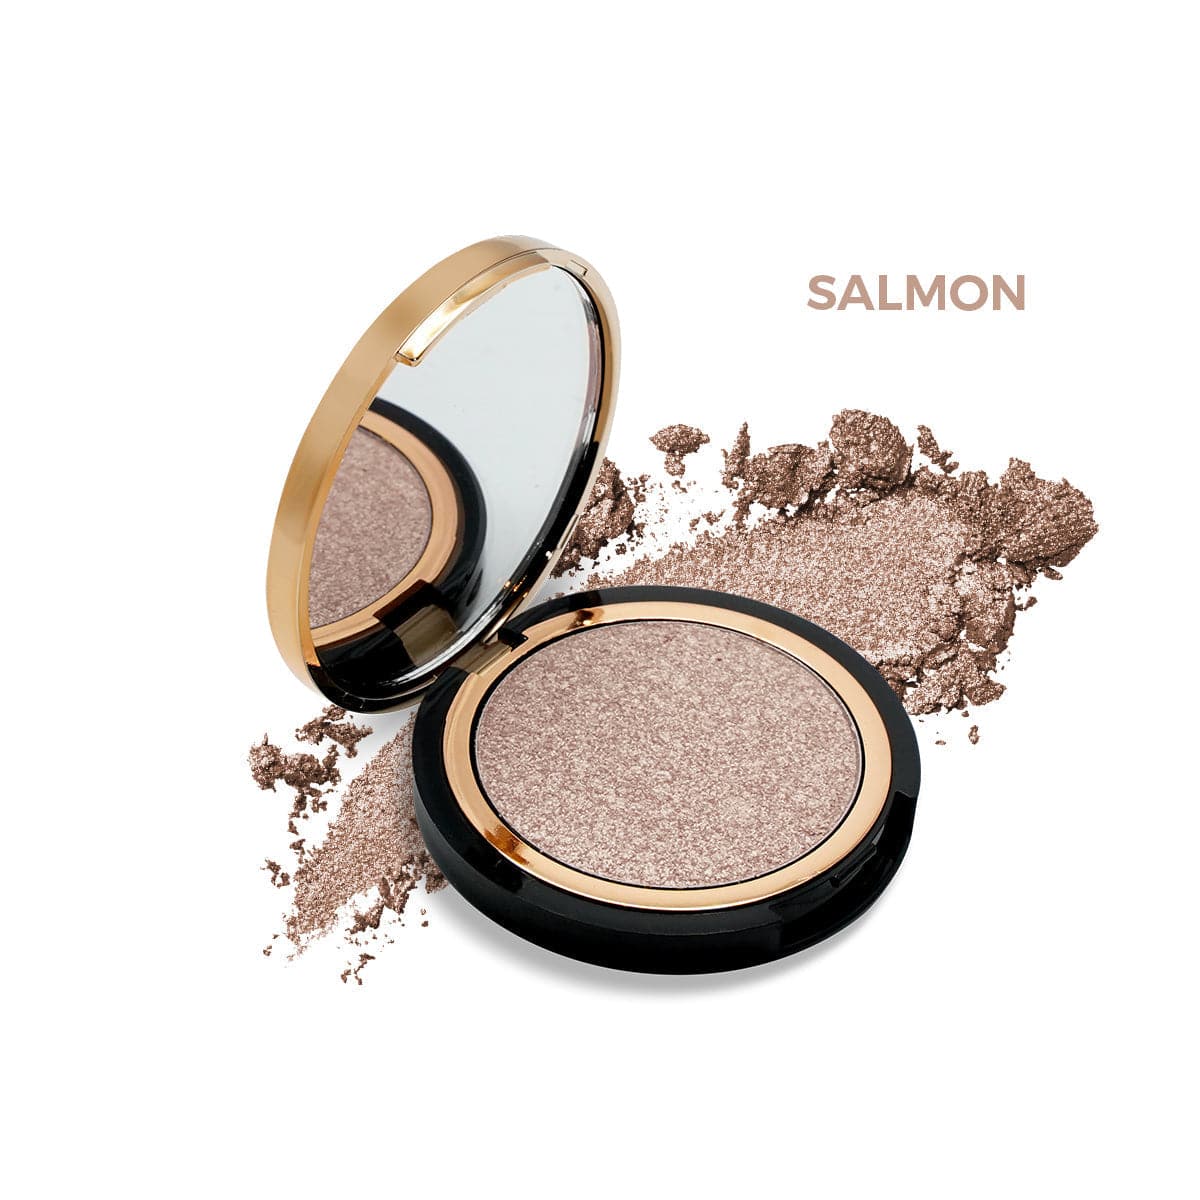 ST London 3D Lights Eye Shadow - Salmon - Premium Health & Beauty from St London - Just Rs 1400.00! Shop now at Cozmetica